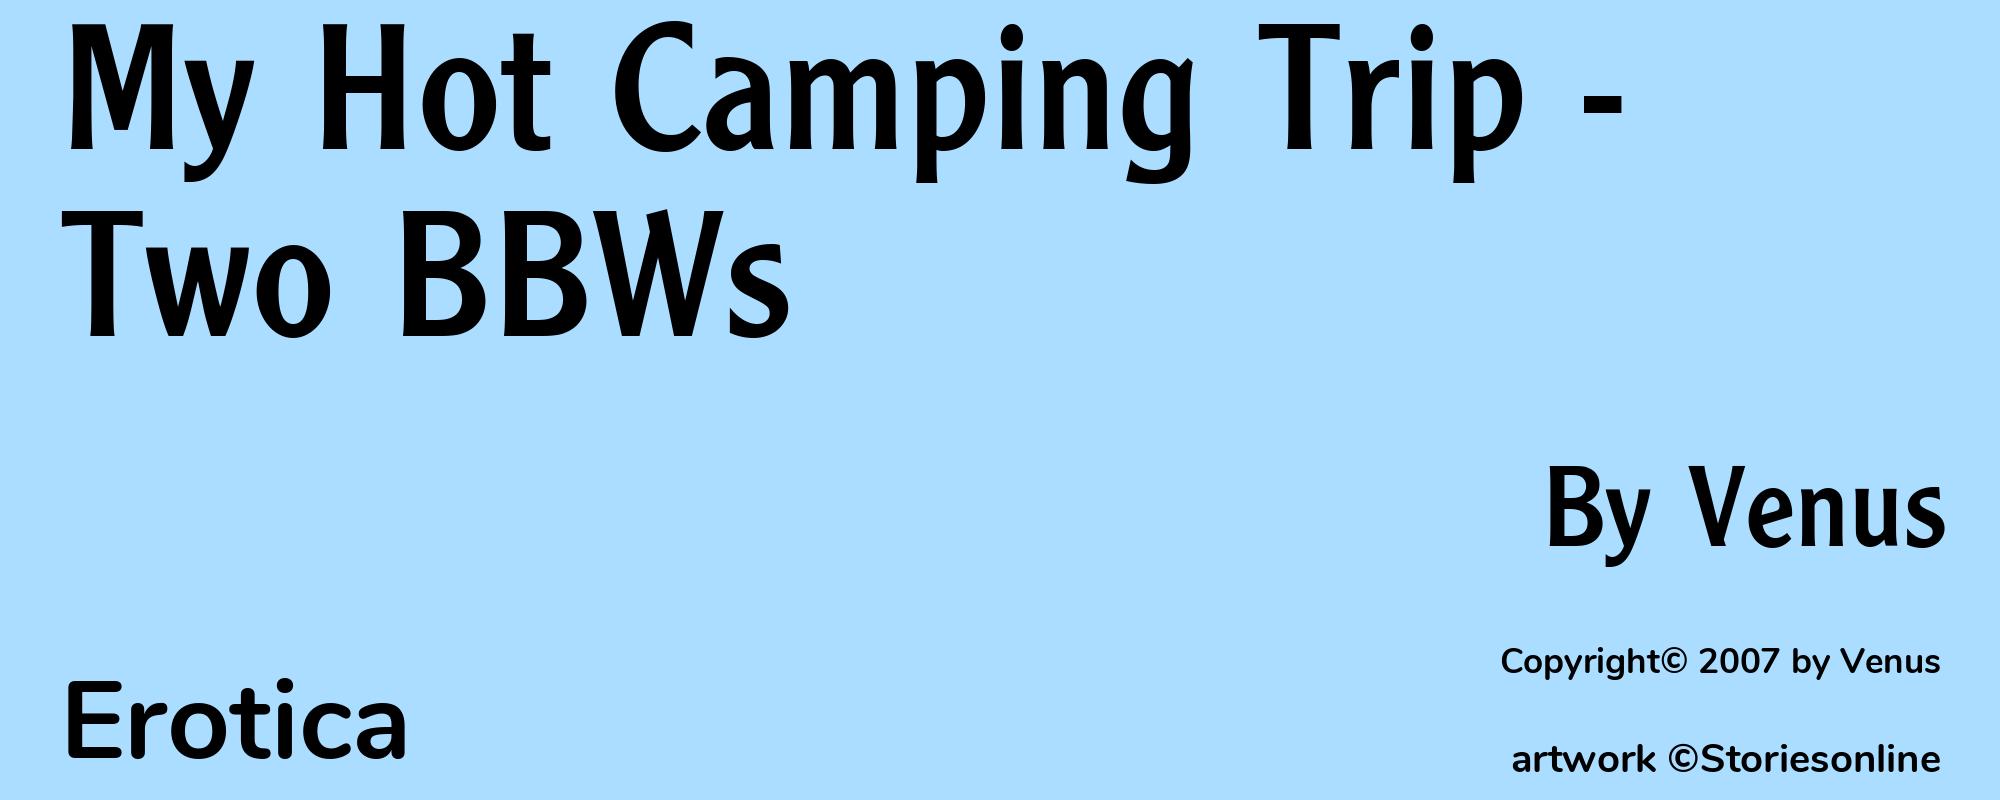 My Hot Camping Trip - Two BBWs - Cover